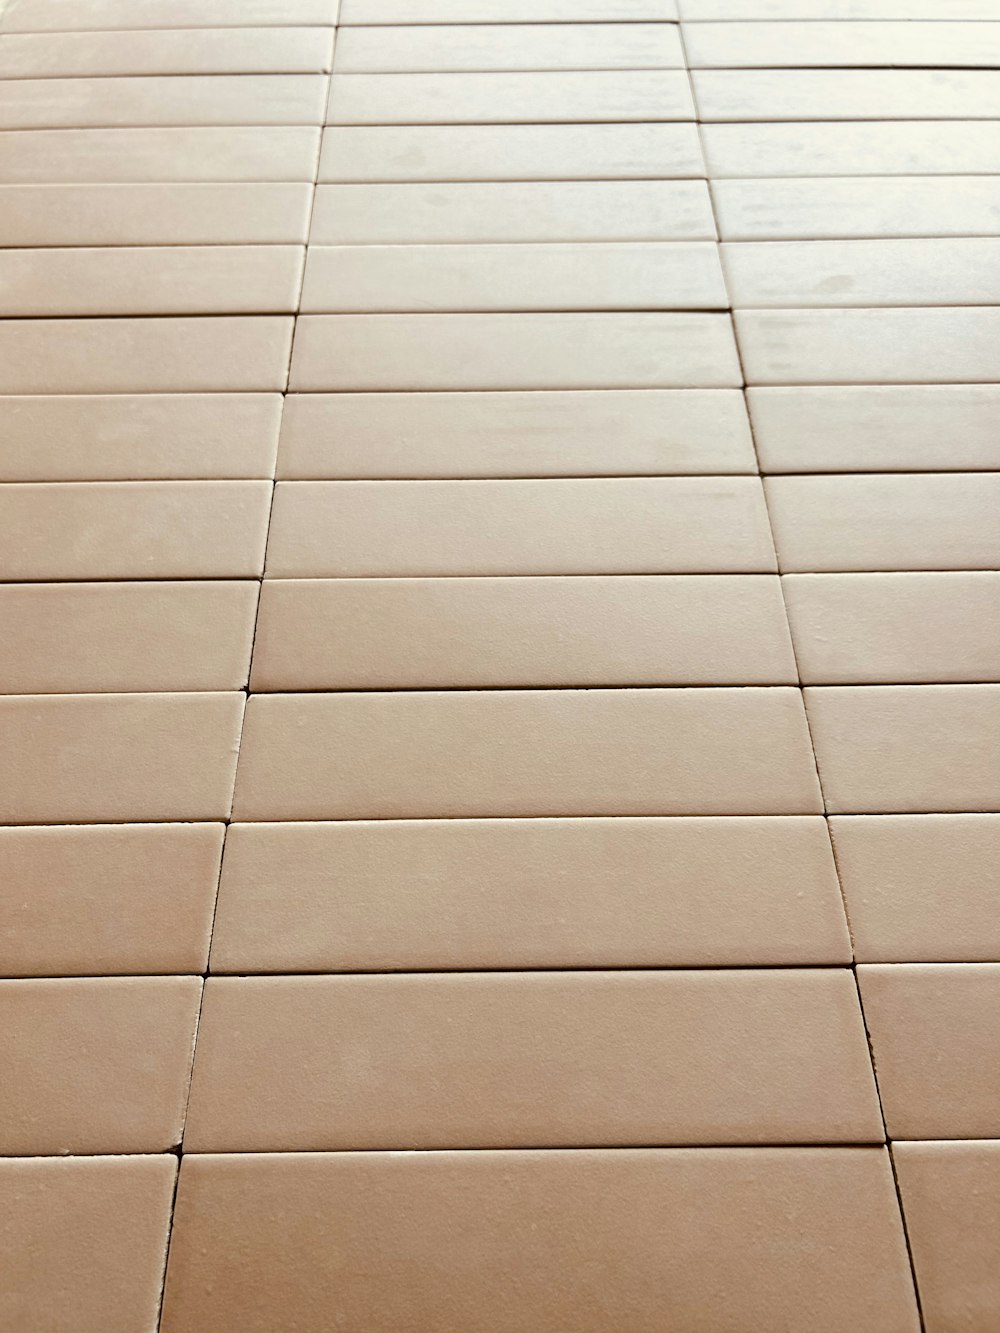 a close up of a tiled floor with a cat laying on it